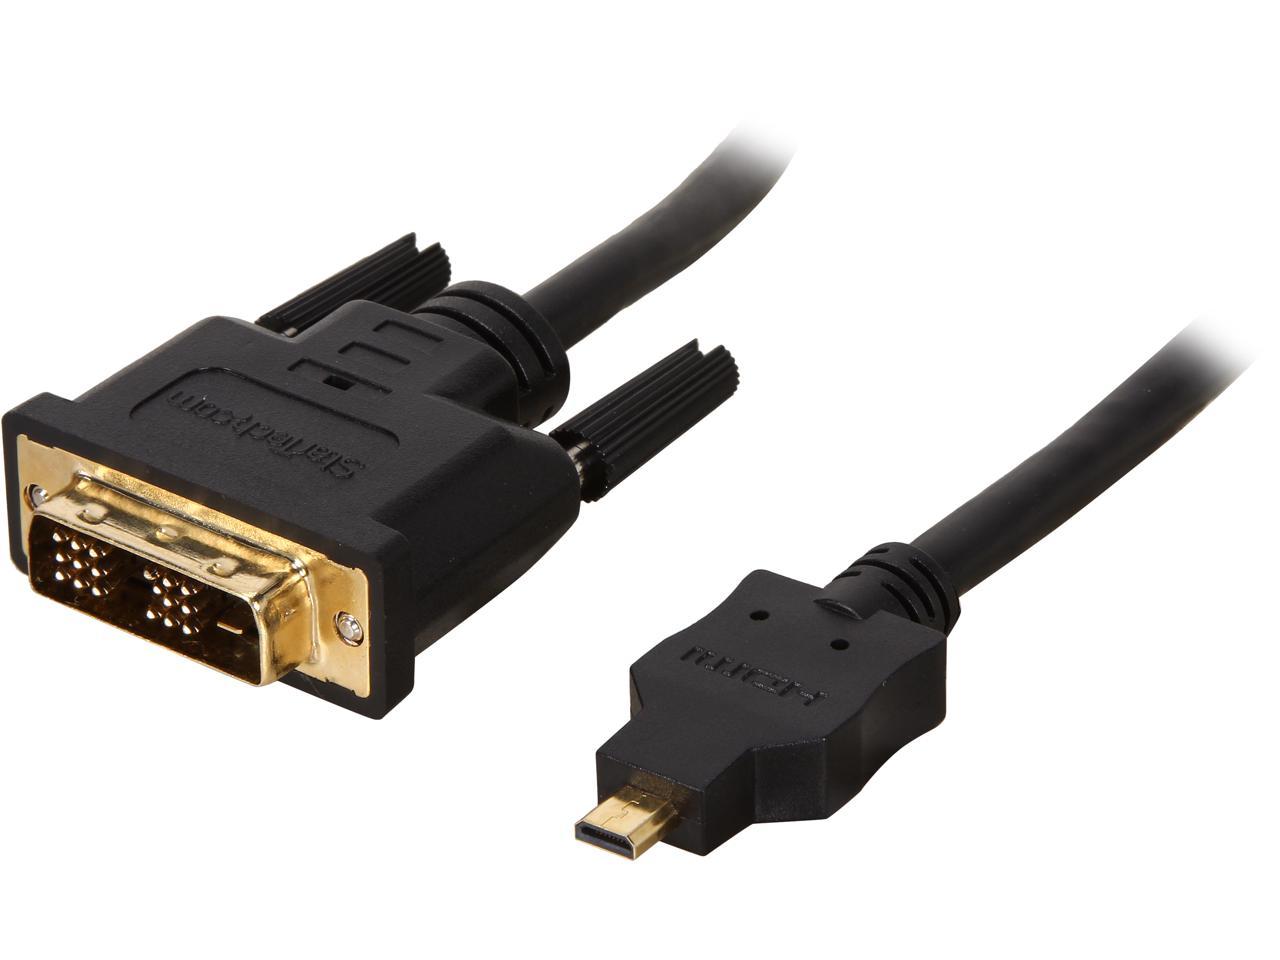 StarTech.com HDDDVIMM1M Black Micro HDMI (19 pin) Male to DVI-D (19 pin) Male to Male Cable - image 1 of 3